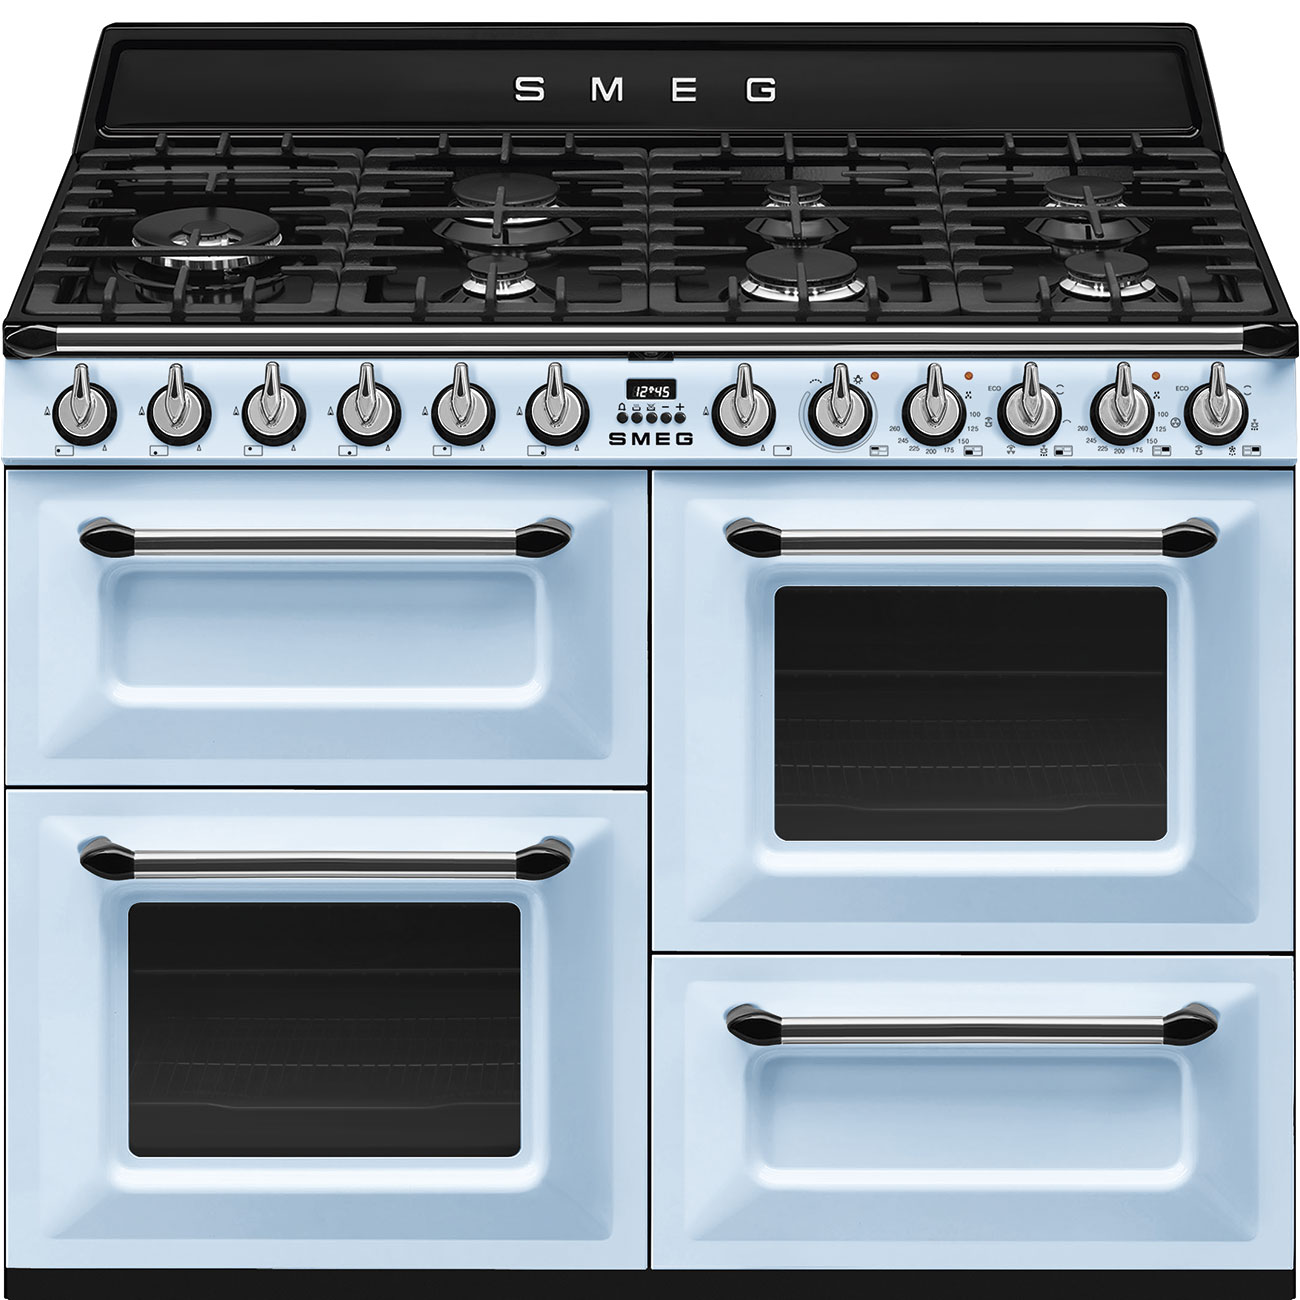 Smeg Pastel blue Cooker with Gas Hob_1